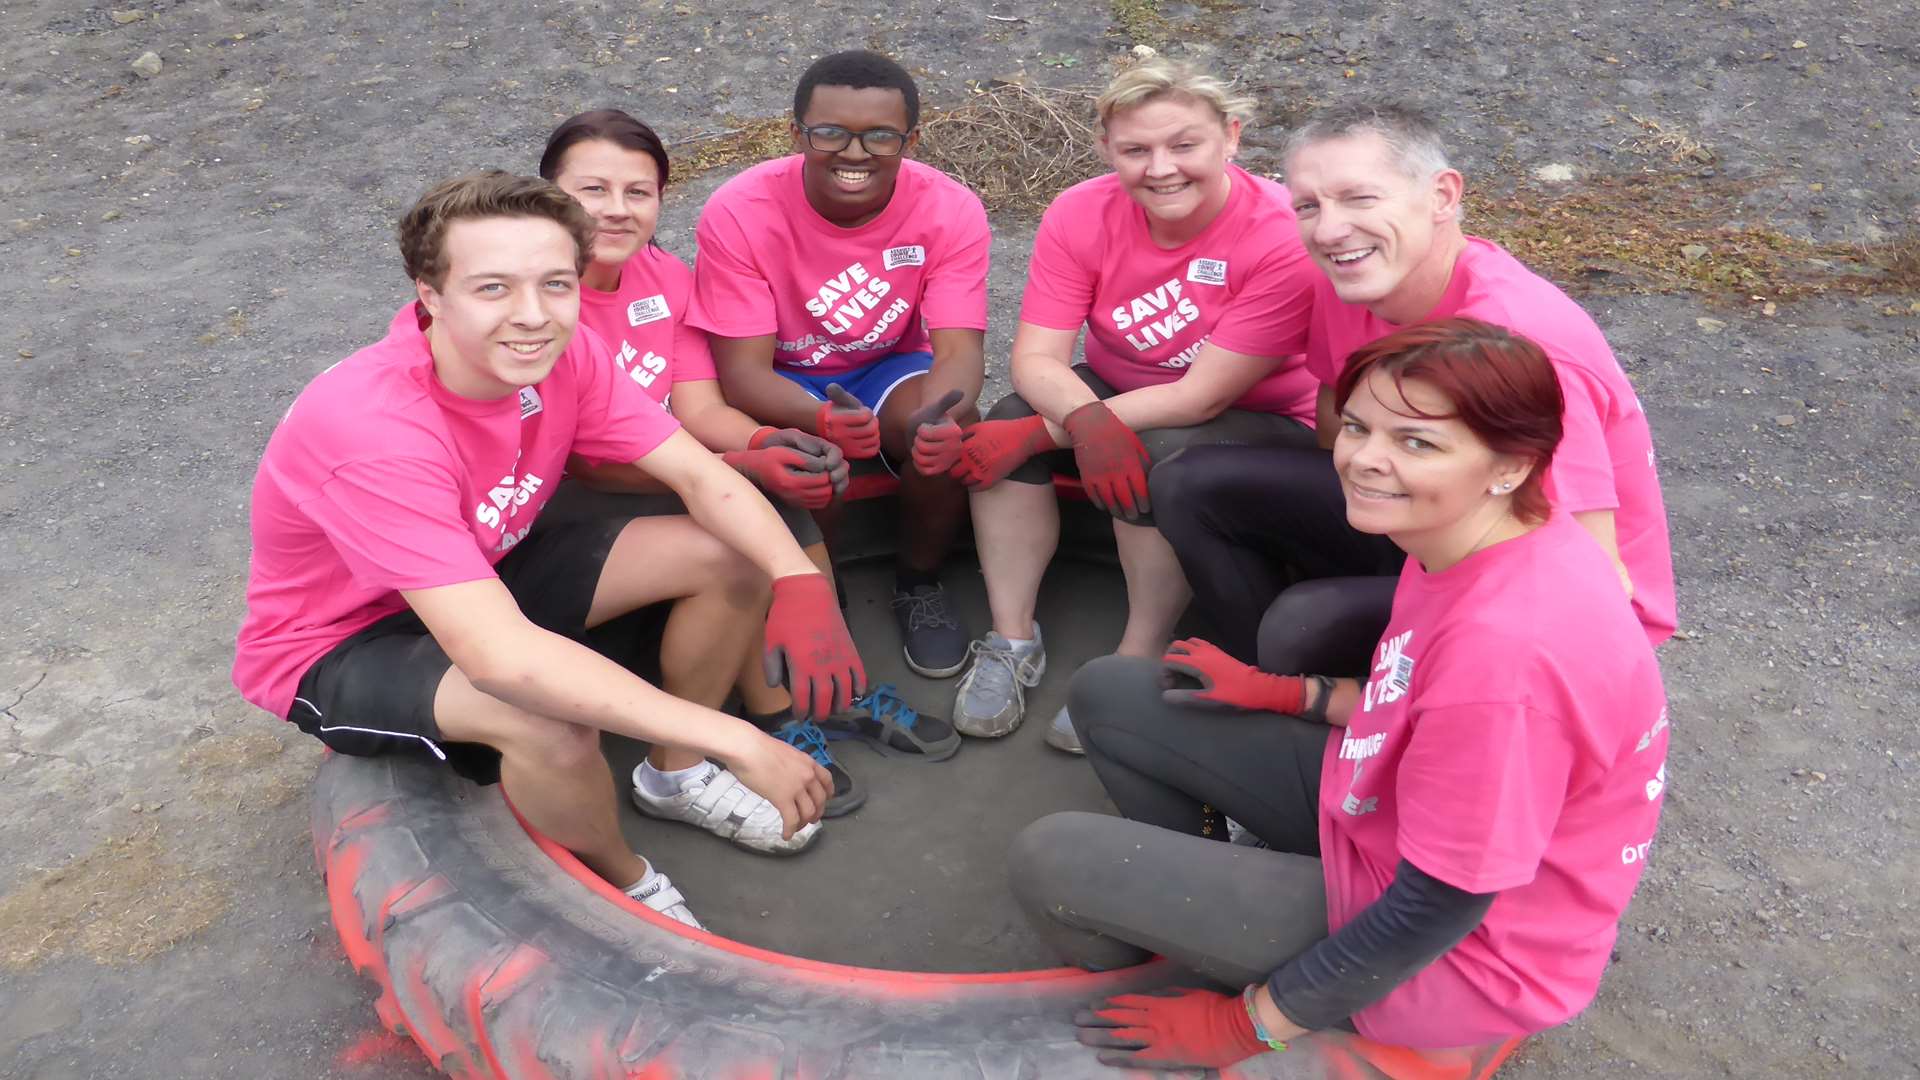 Team Half PFast of Deal raised the most funds for charity at the KM Assault Course Challenge on Saturday at Fowlmead Country Park. They were supporting Breakthrough Breast Cancer